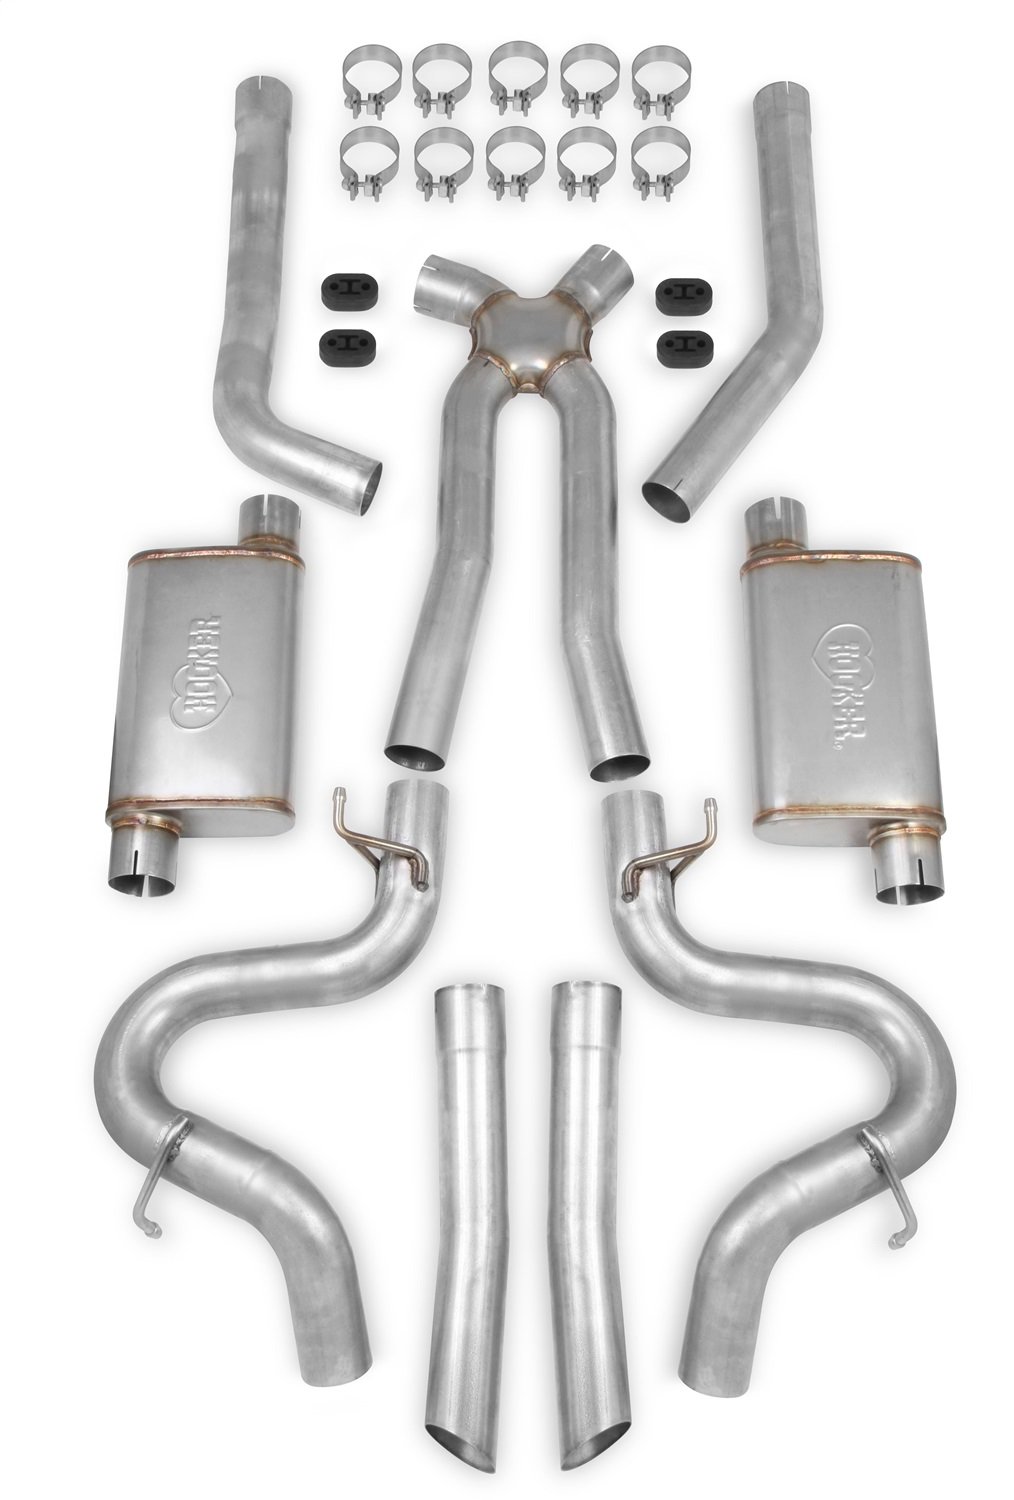 70501364-R Blackheart LS Engine Swap Header-Back Exhaust System with Mufflers for 1978-1988 GM Small Block